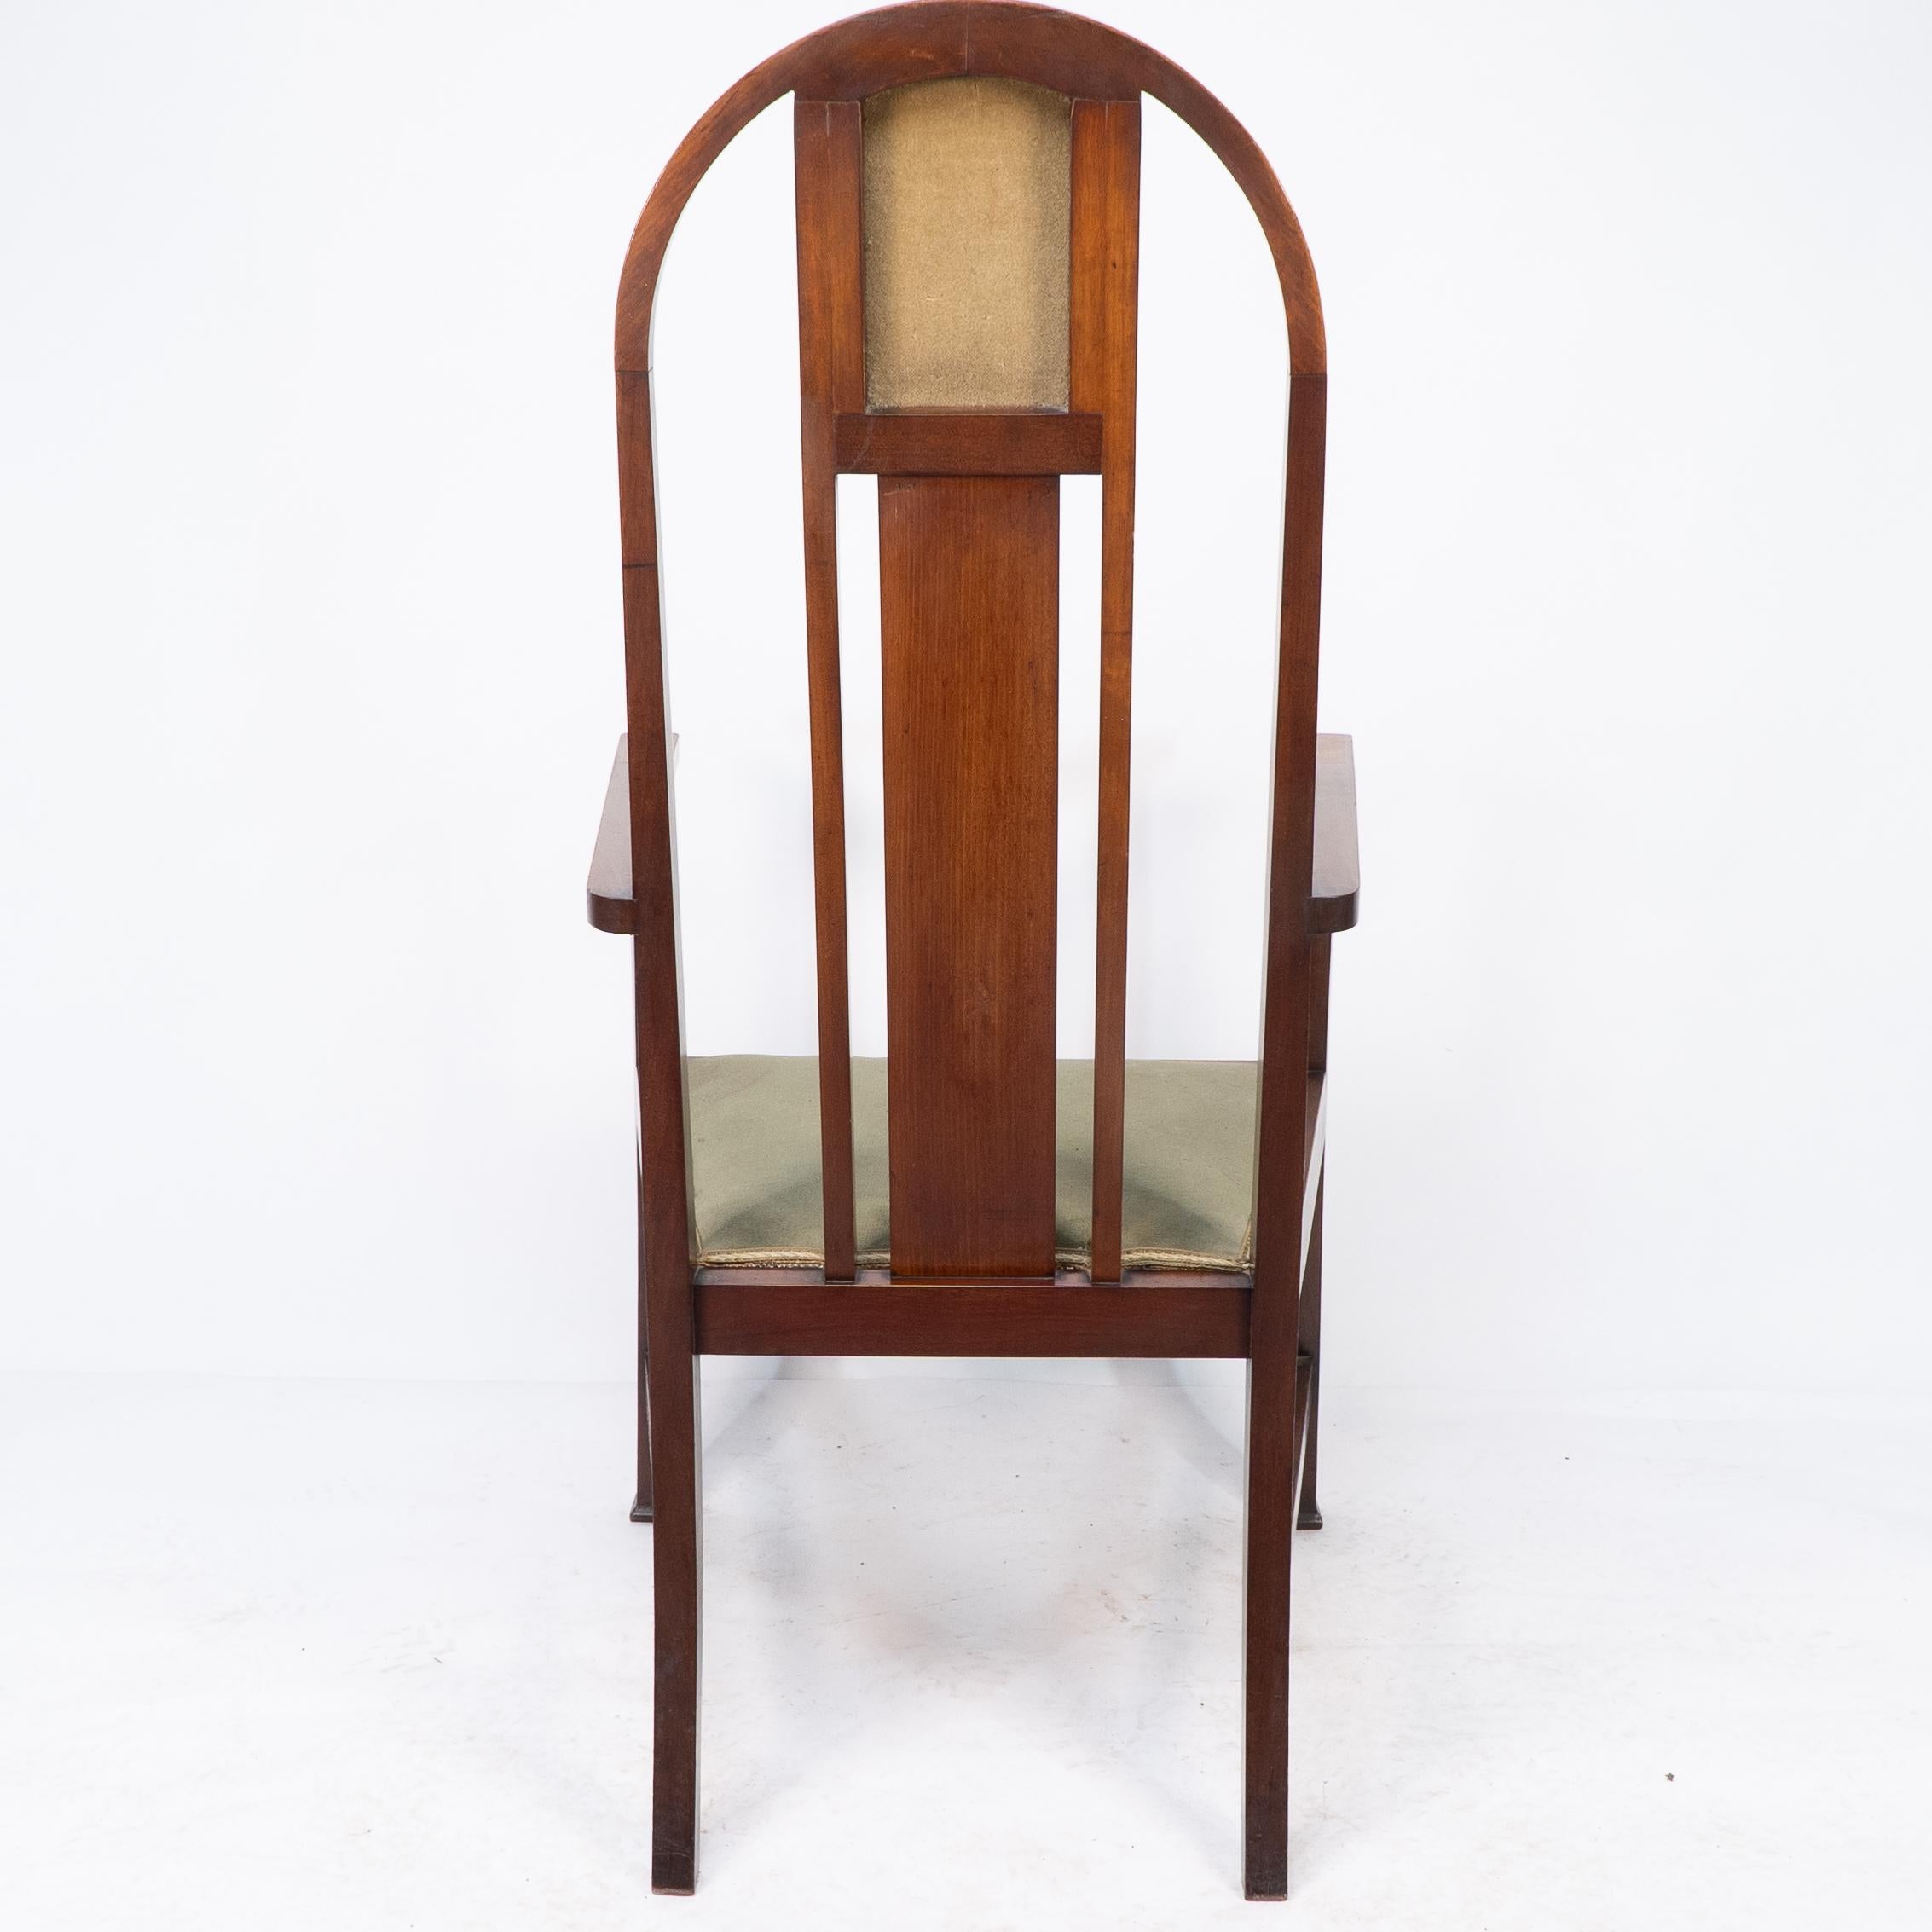 Liberty and Co attri, A Pair of Arts and Crafts mahogany and Inlaid Armchair For Sale 11